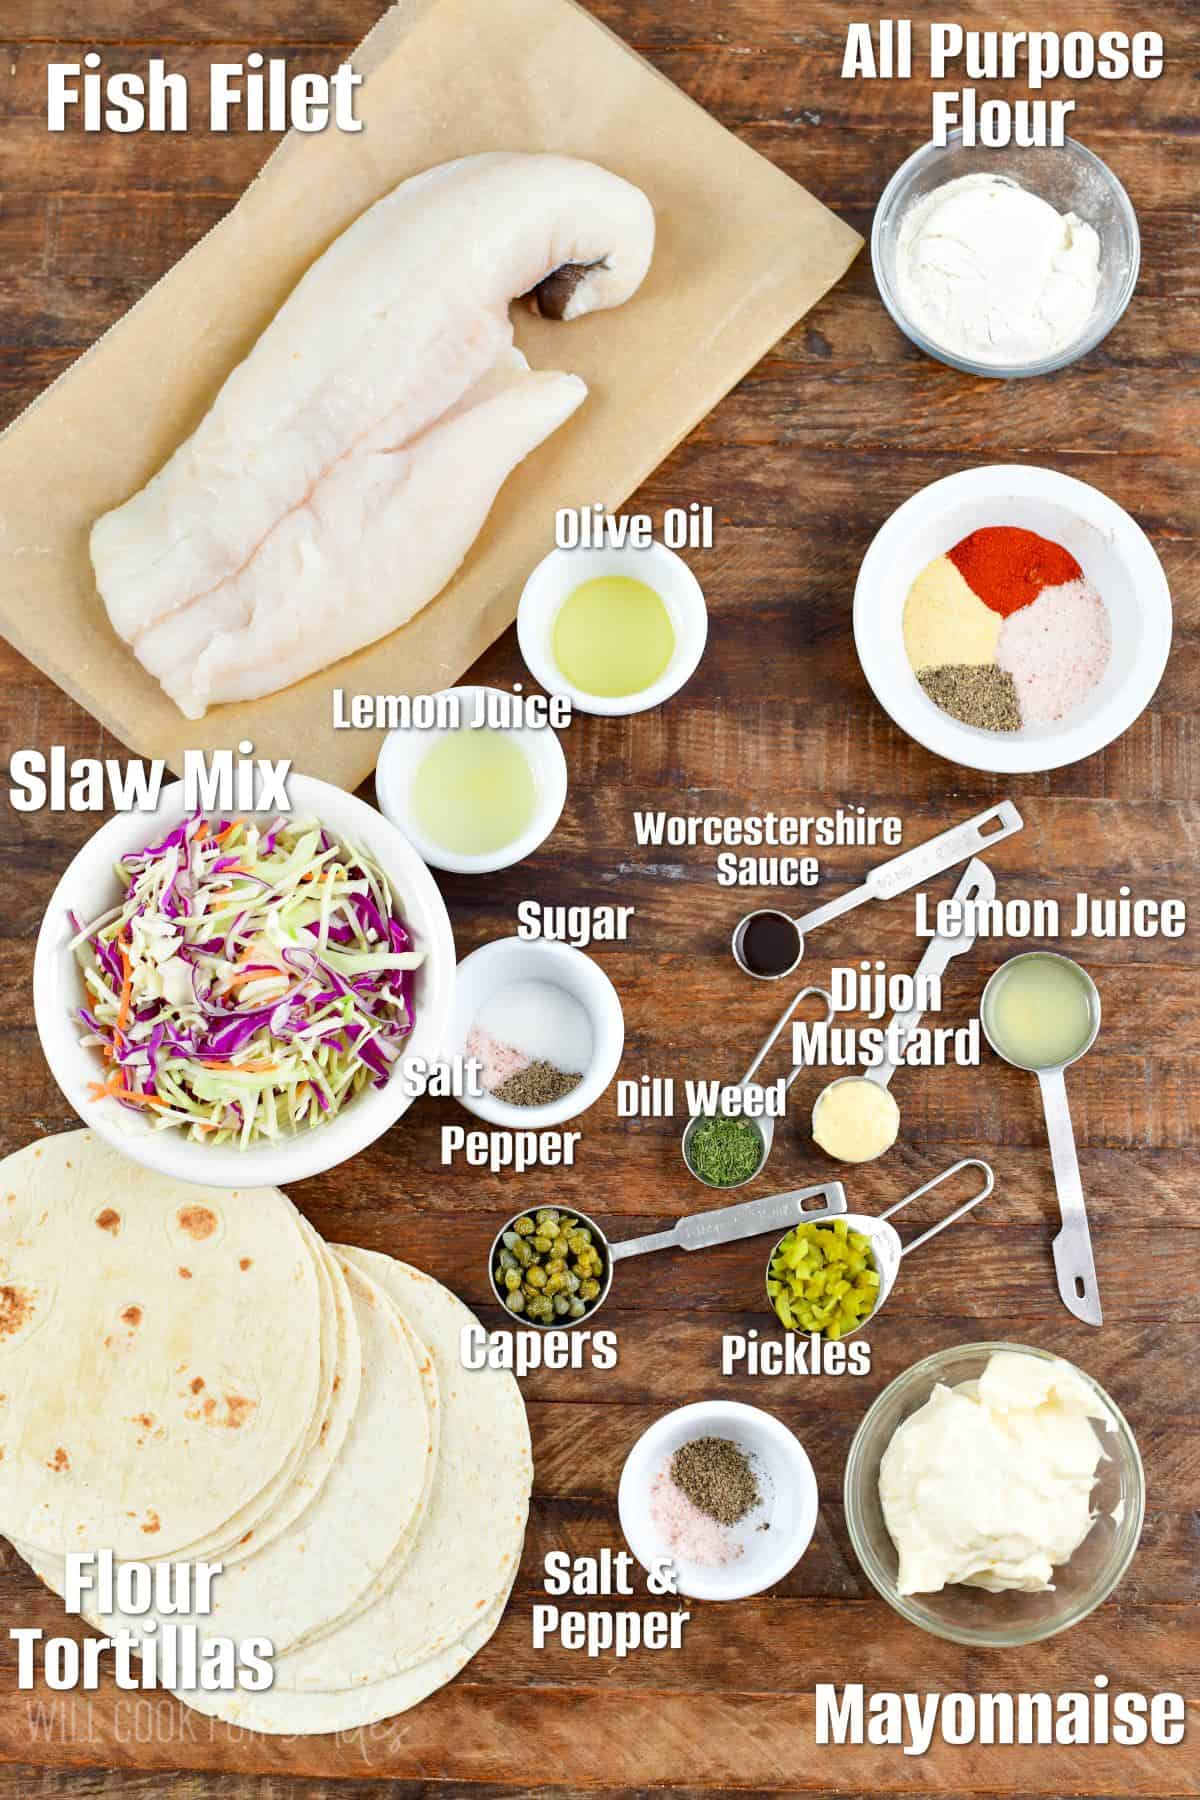 Labeled ingredients for Fried fish tacos on a wood surface.